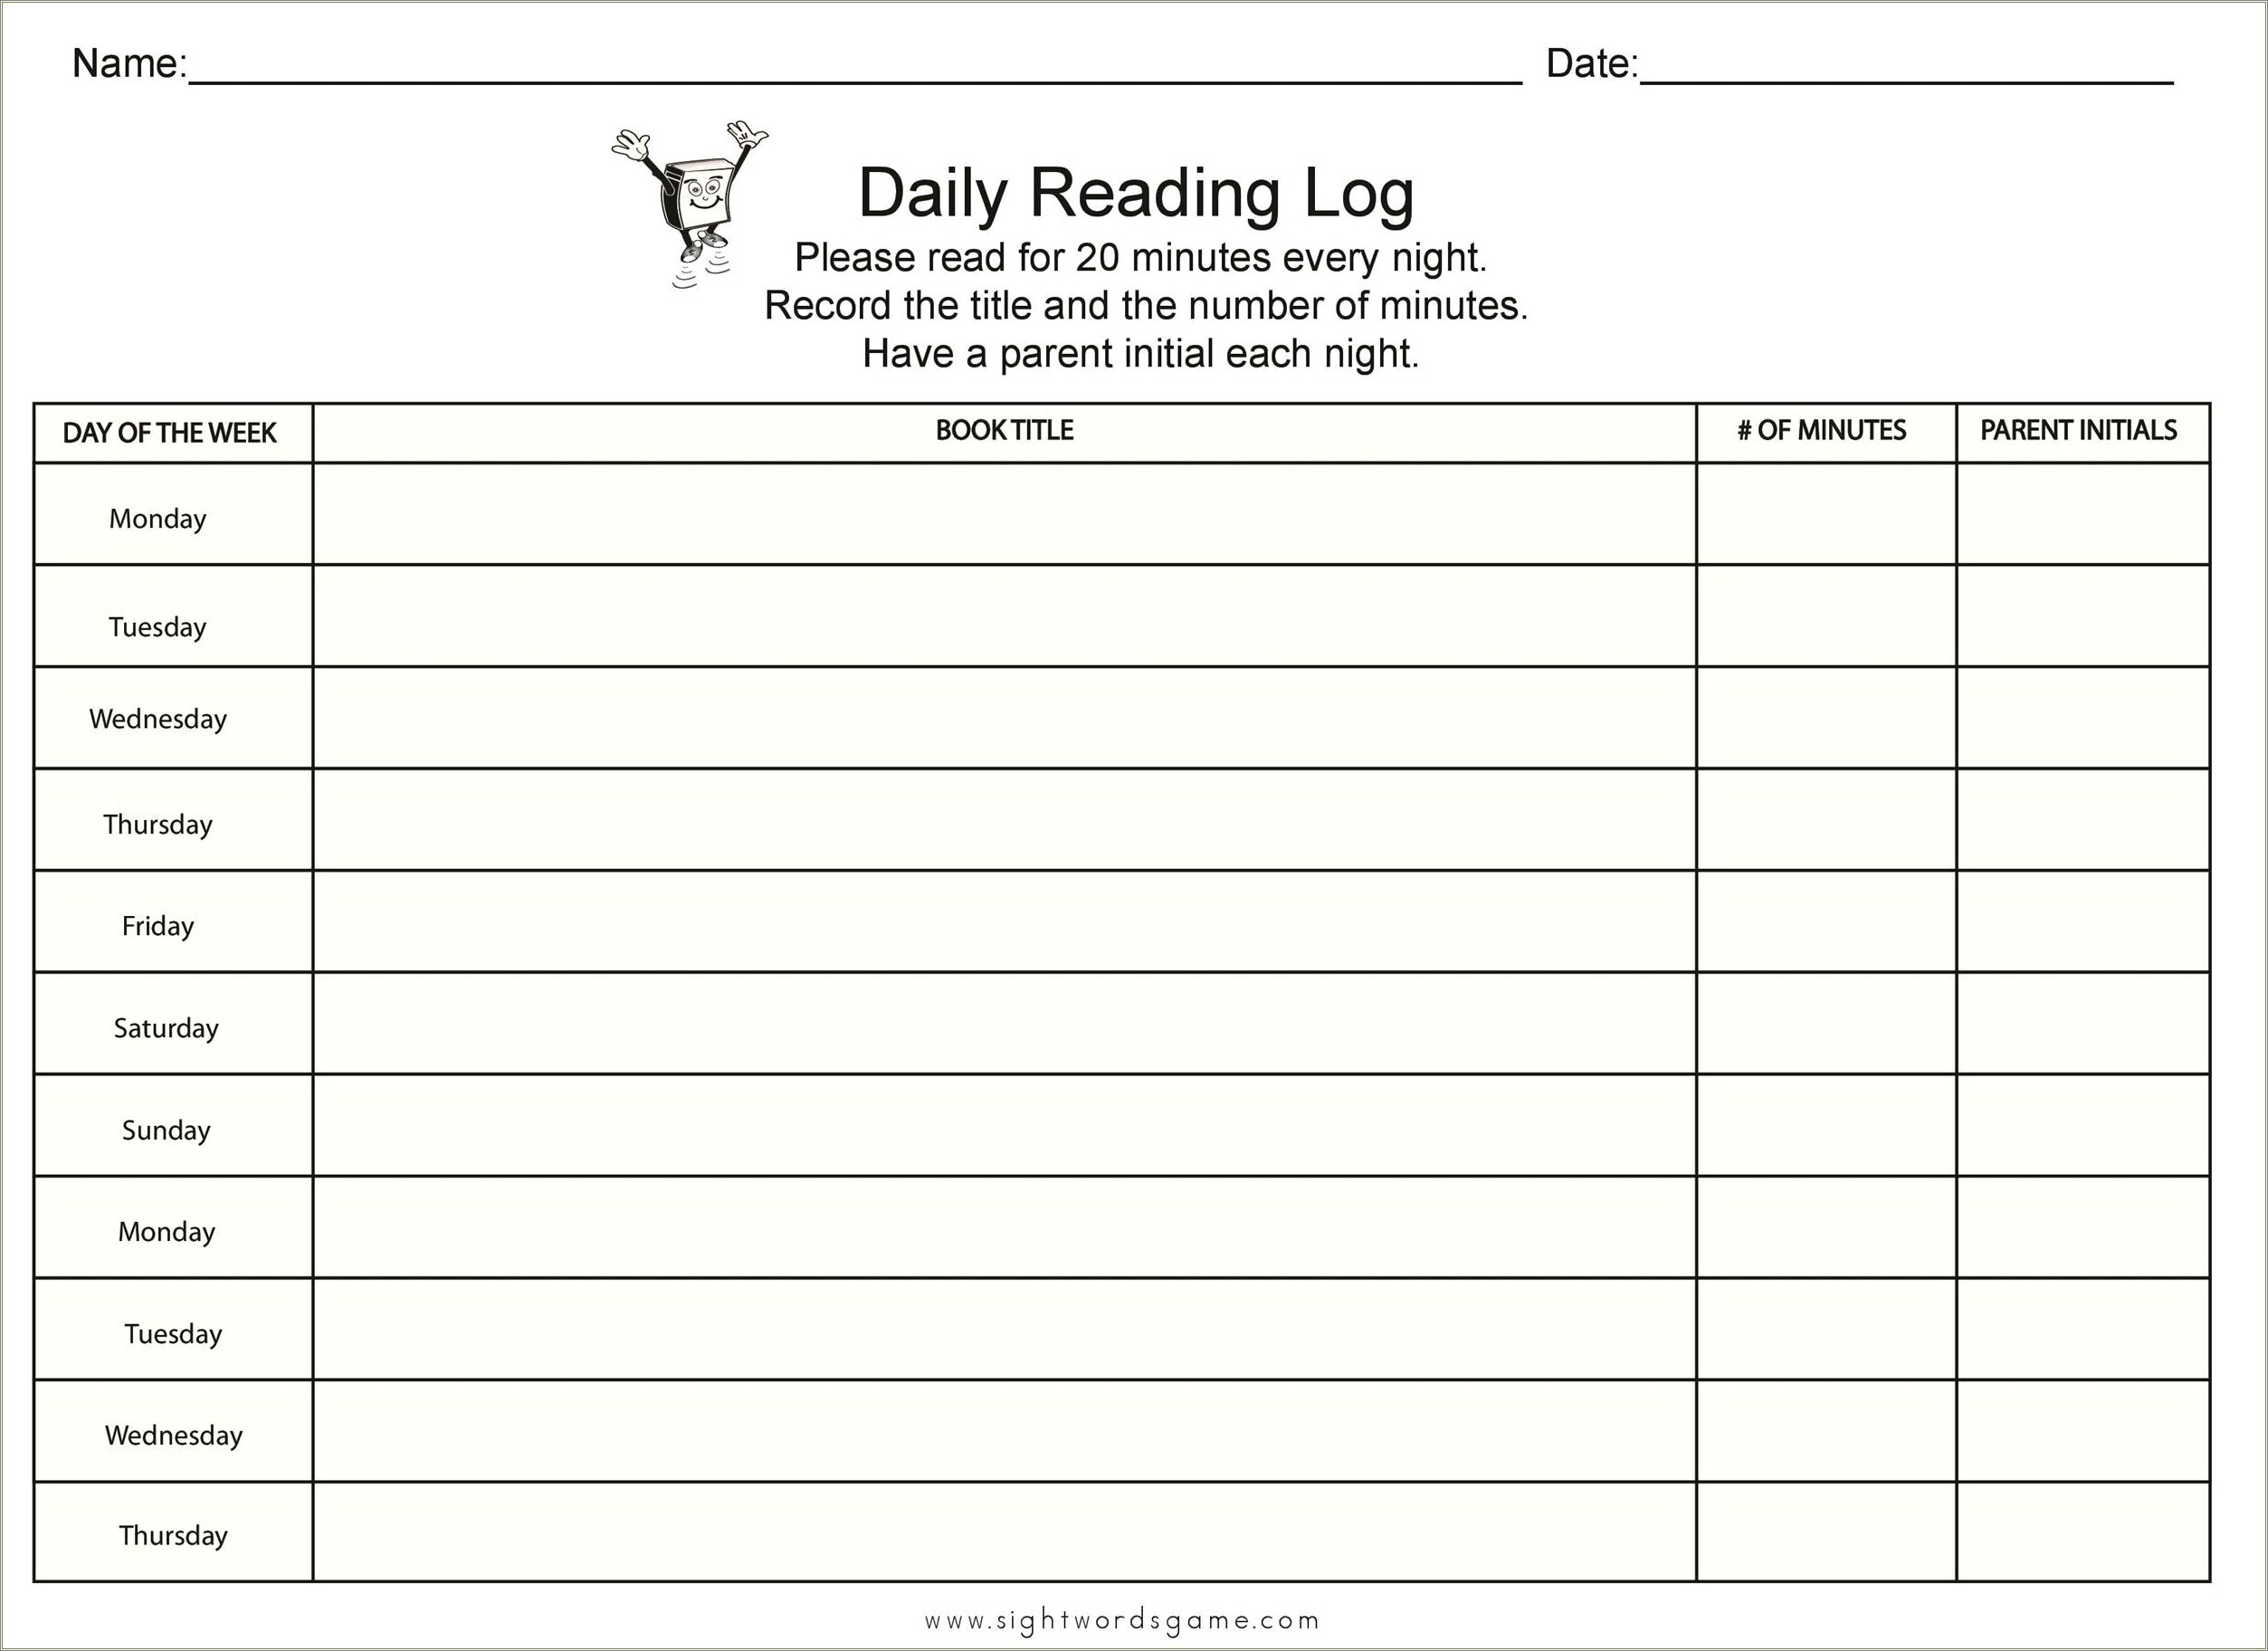 Research Format For Elementary Students Free Printable Templates